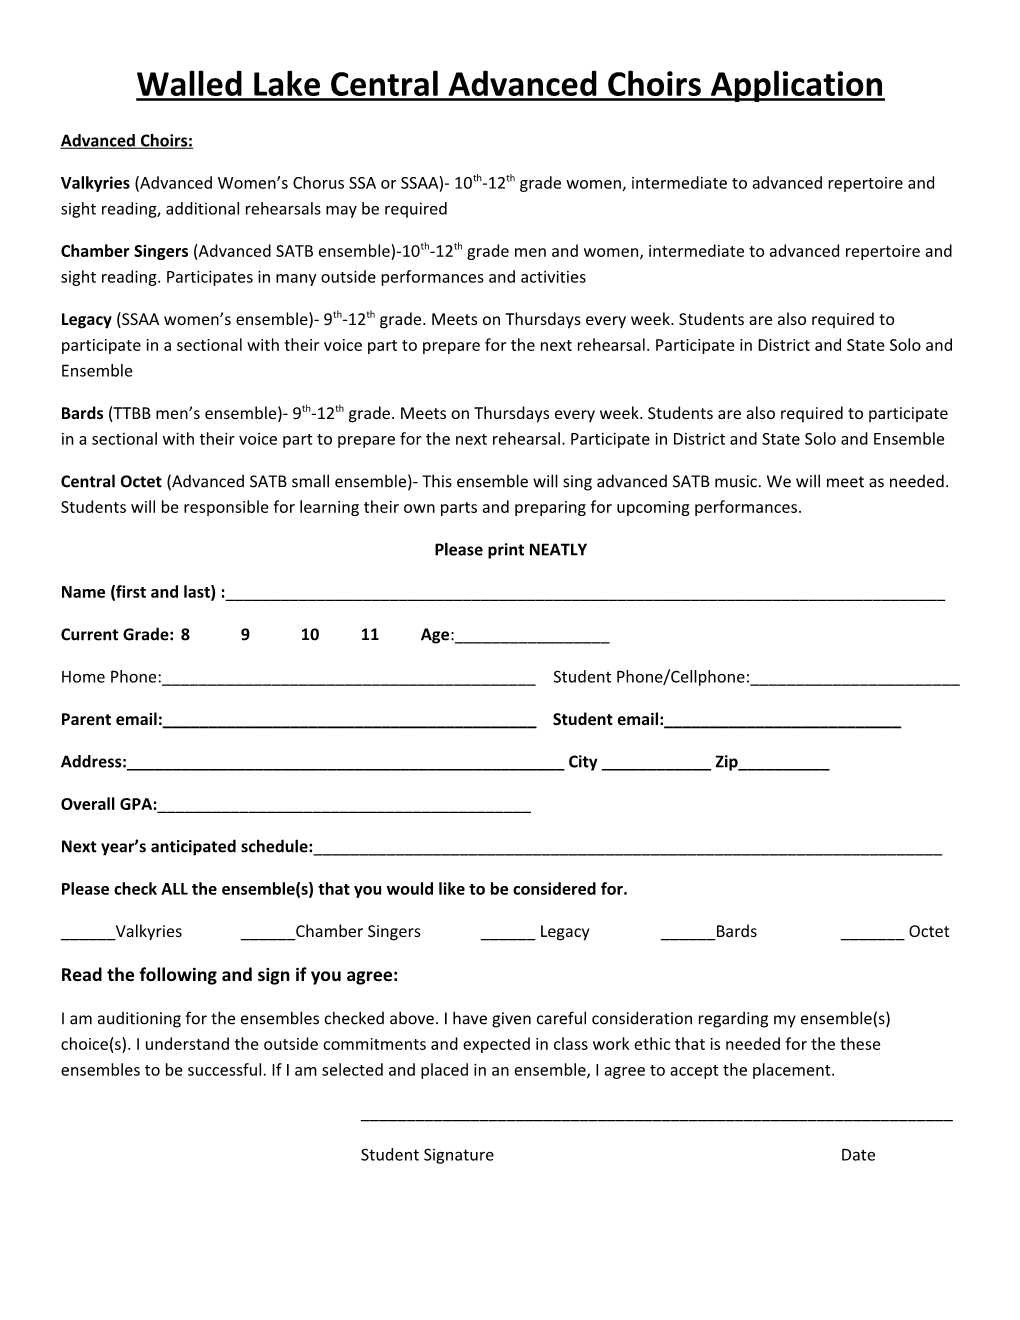 Walled Lake Central Advanced Choirs Application